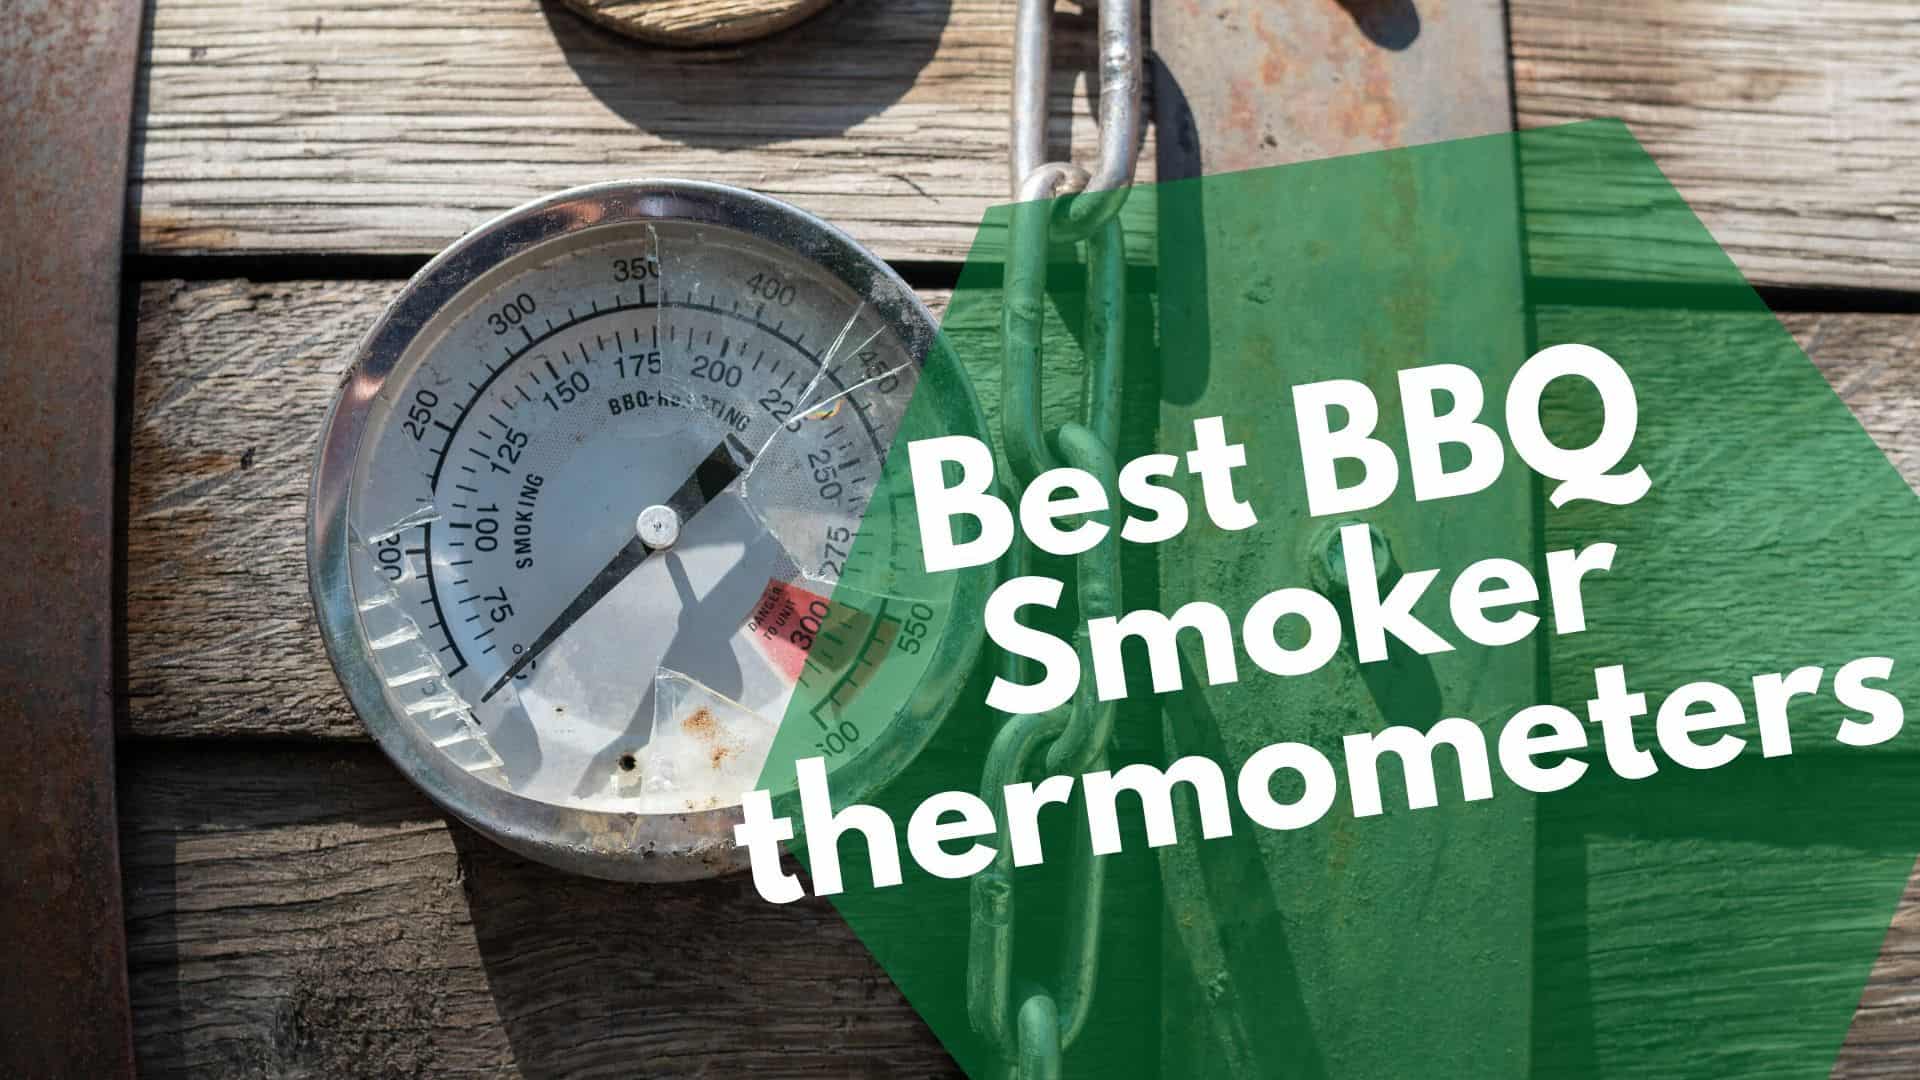 3 1/8 inch Charcoal Grill Temperature Gauge, Accurate BBQ Grill Smoker  Thermometer Gauge Replacement for Oklahoma Joe's Smokers, and Smoker Wood